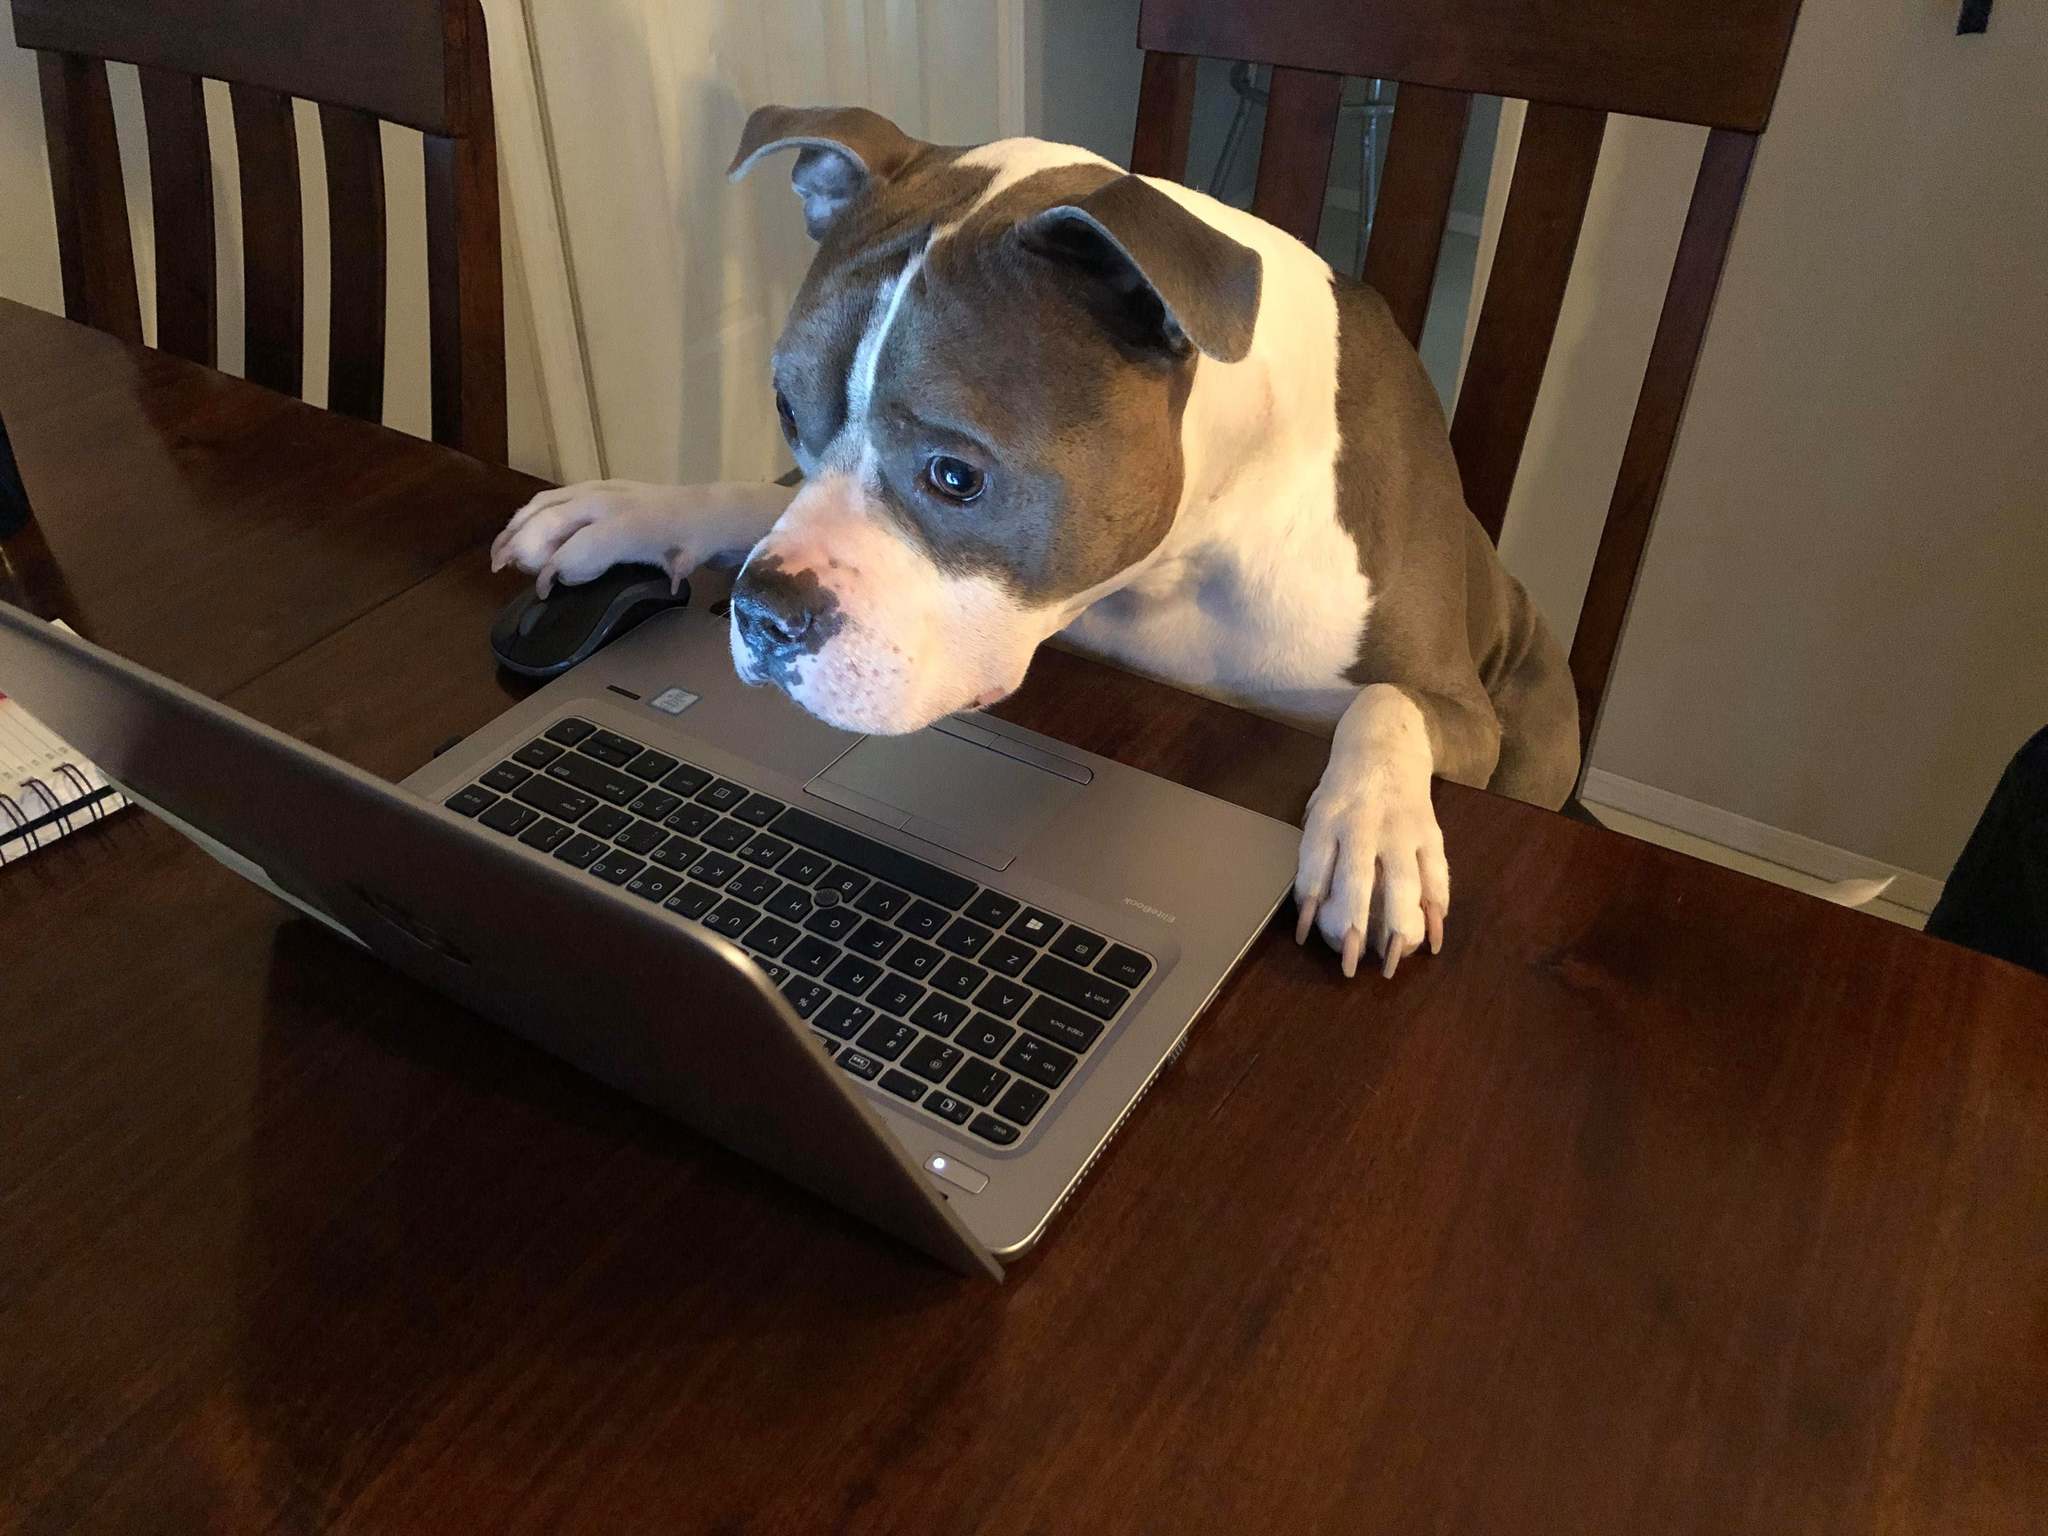 An analyst monitors the dynamics of dog food prices - Dog, Sight, Notebook, Milota, From the network